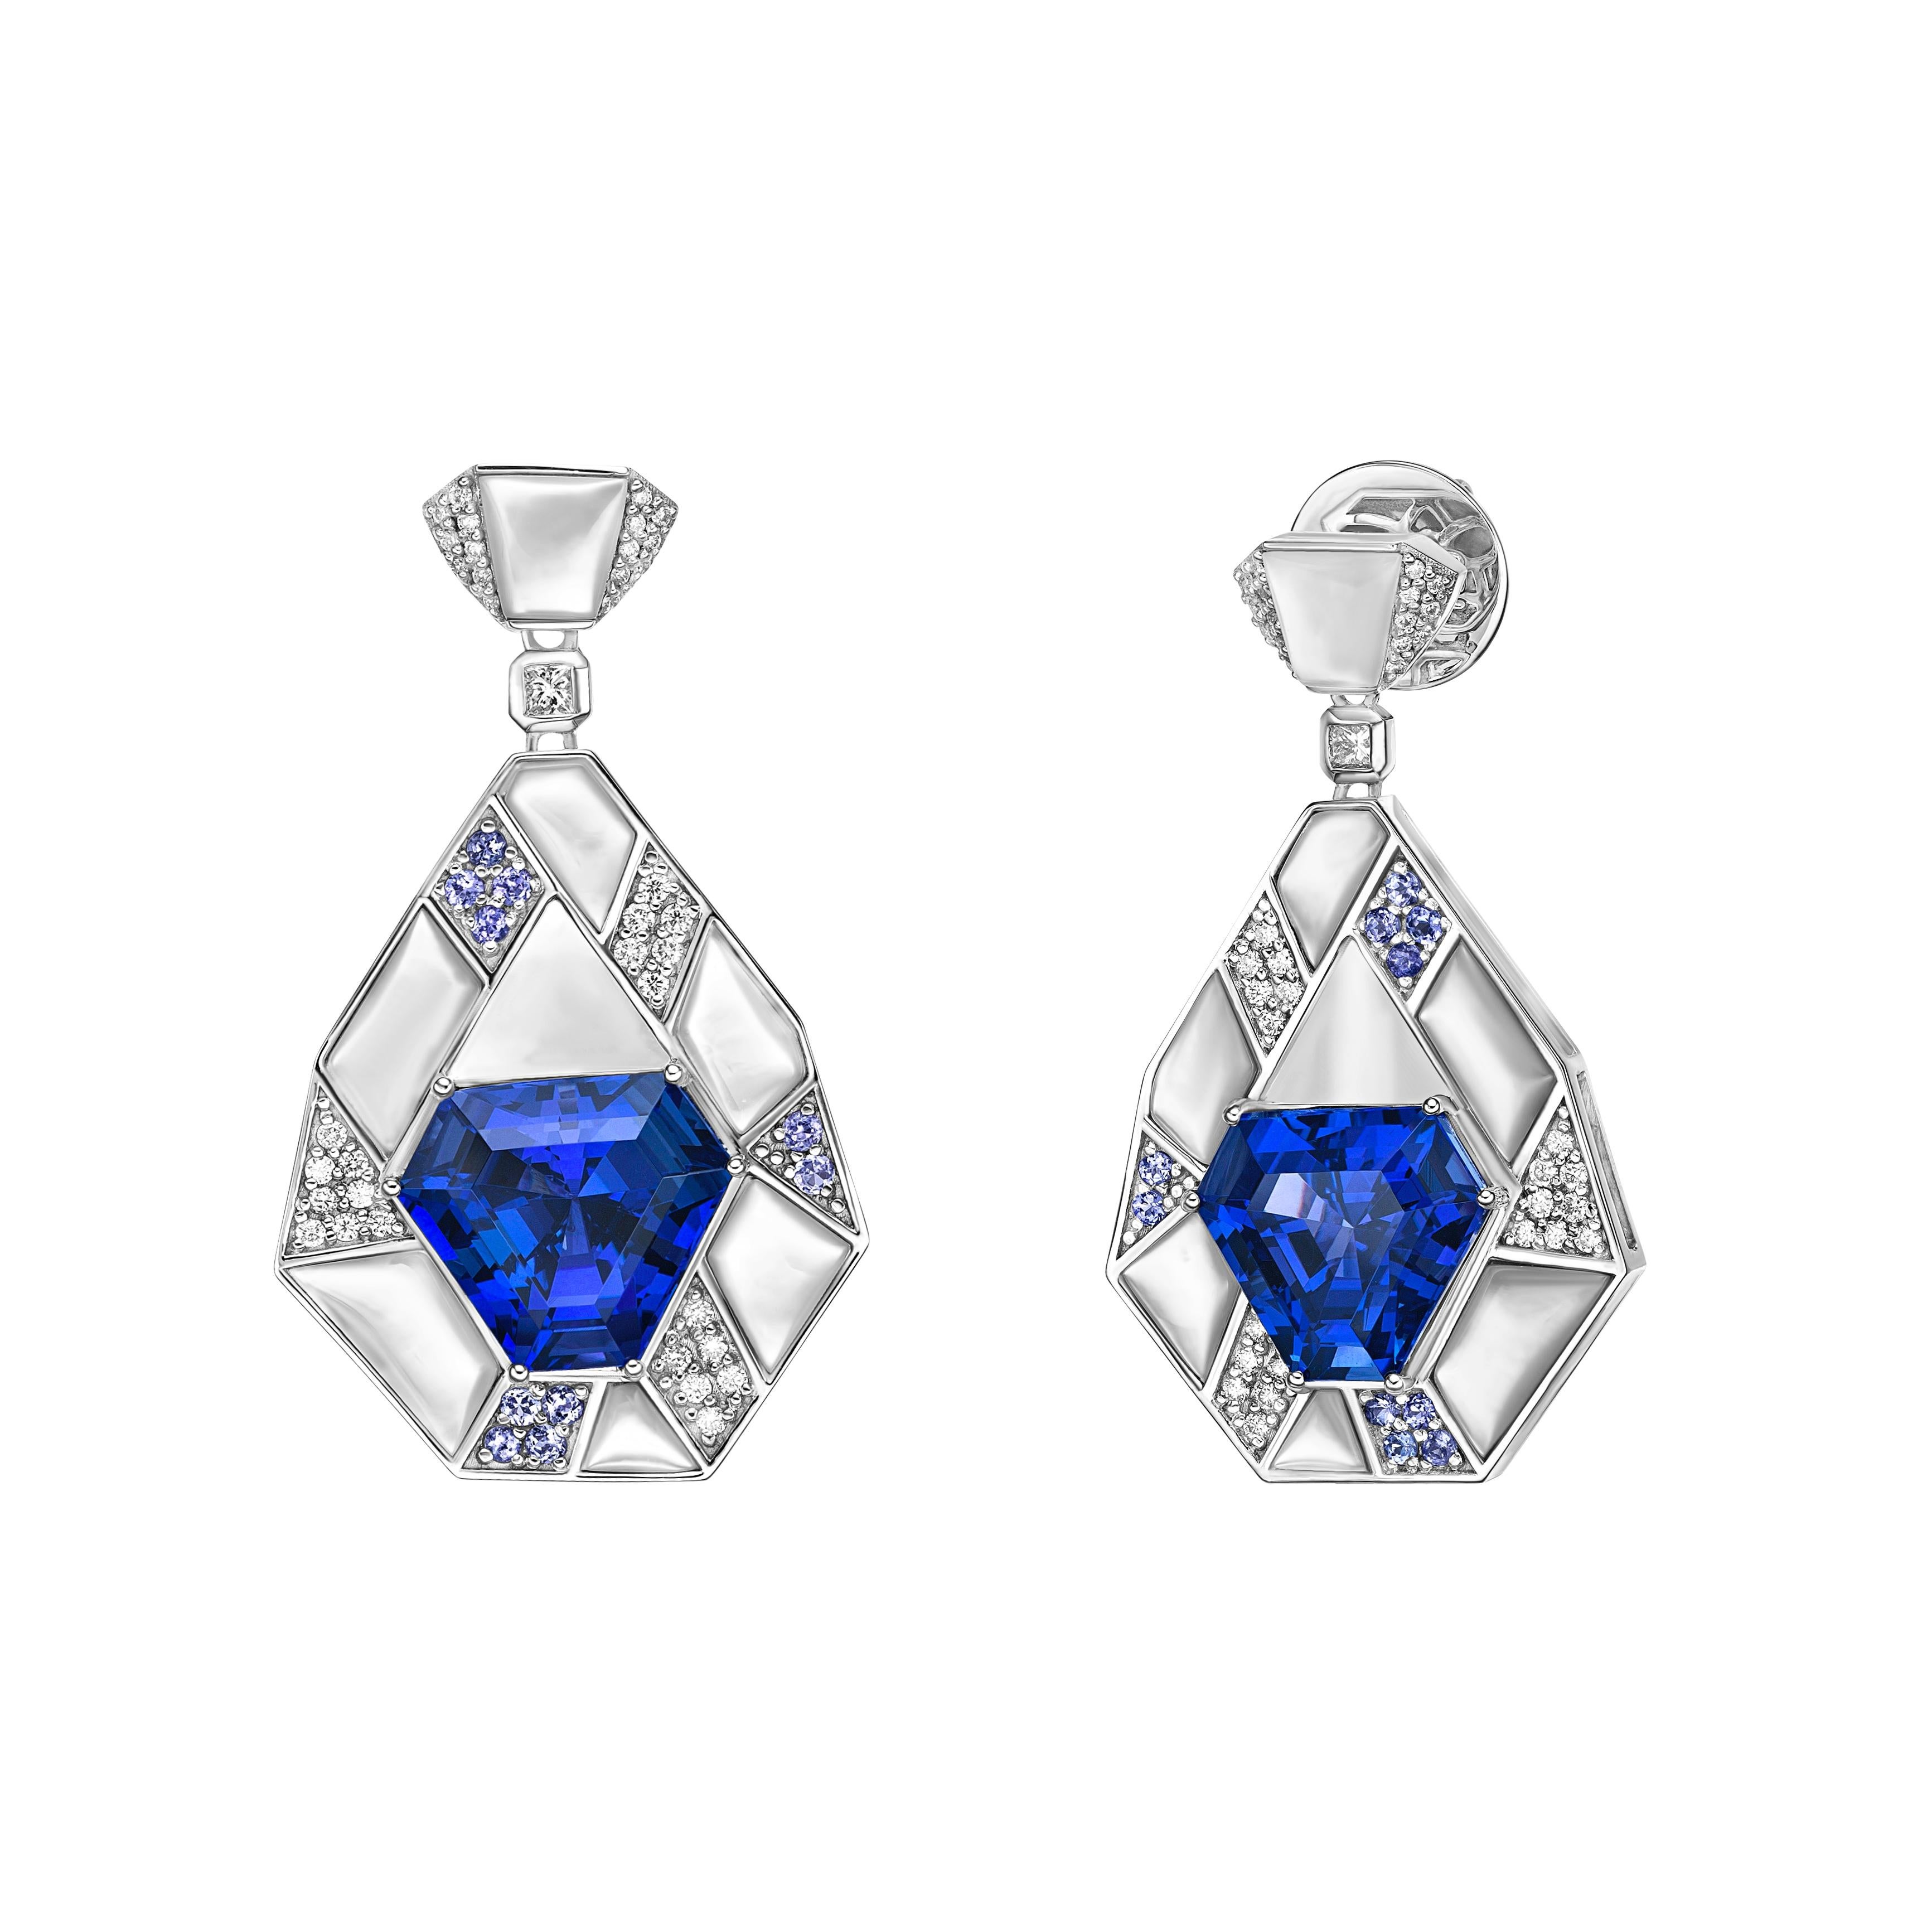 Mixed Cut 15.93 Carat Tanzanite Drop Earrings in 18KWG with Mother of Pearl and Diamond. For Sale